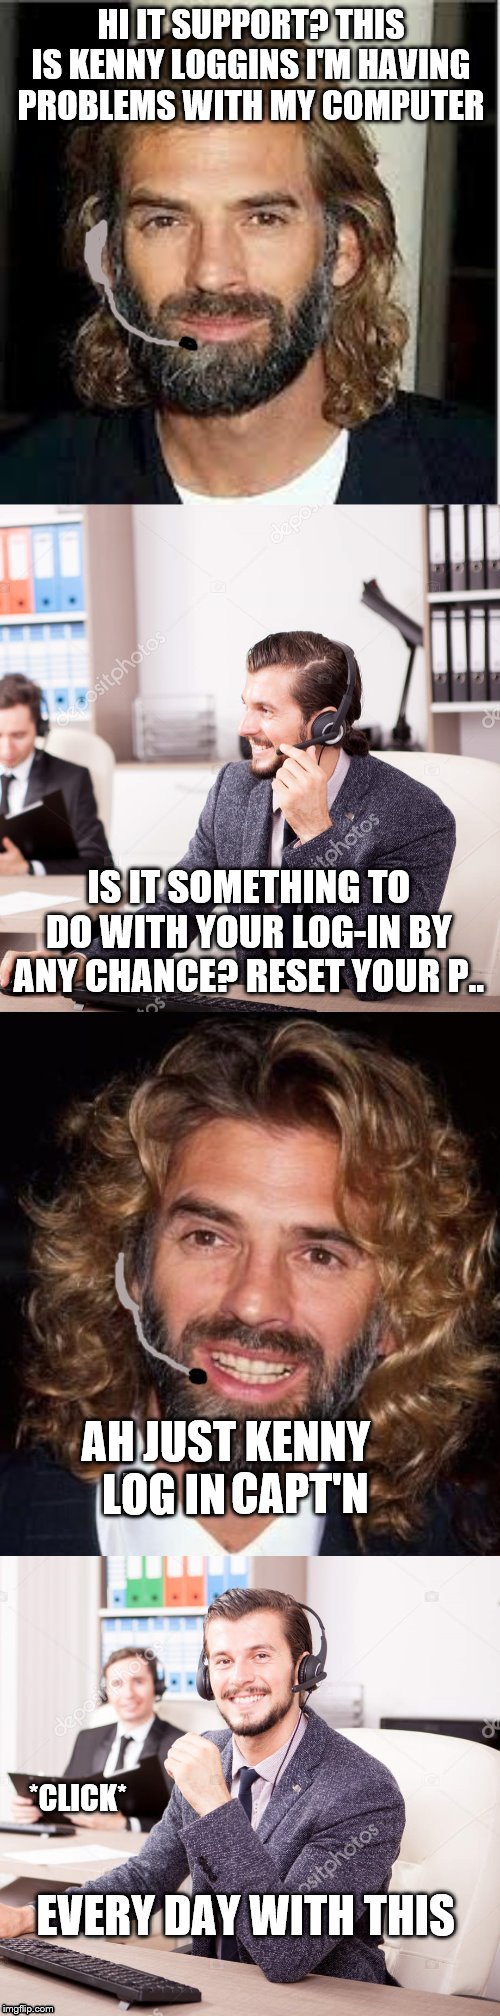 He went to the danger phone | AH; LOG IN; *CLICK* | image tagged in kenny loggins,it support | made w/ Imgflip meme maker